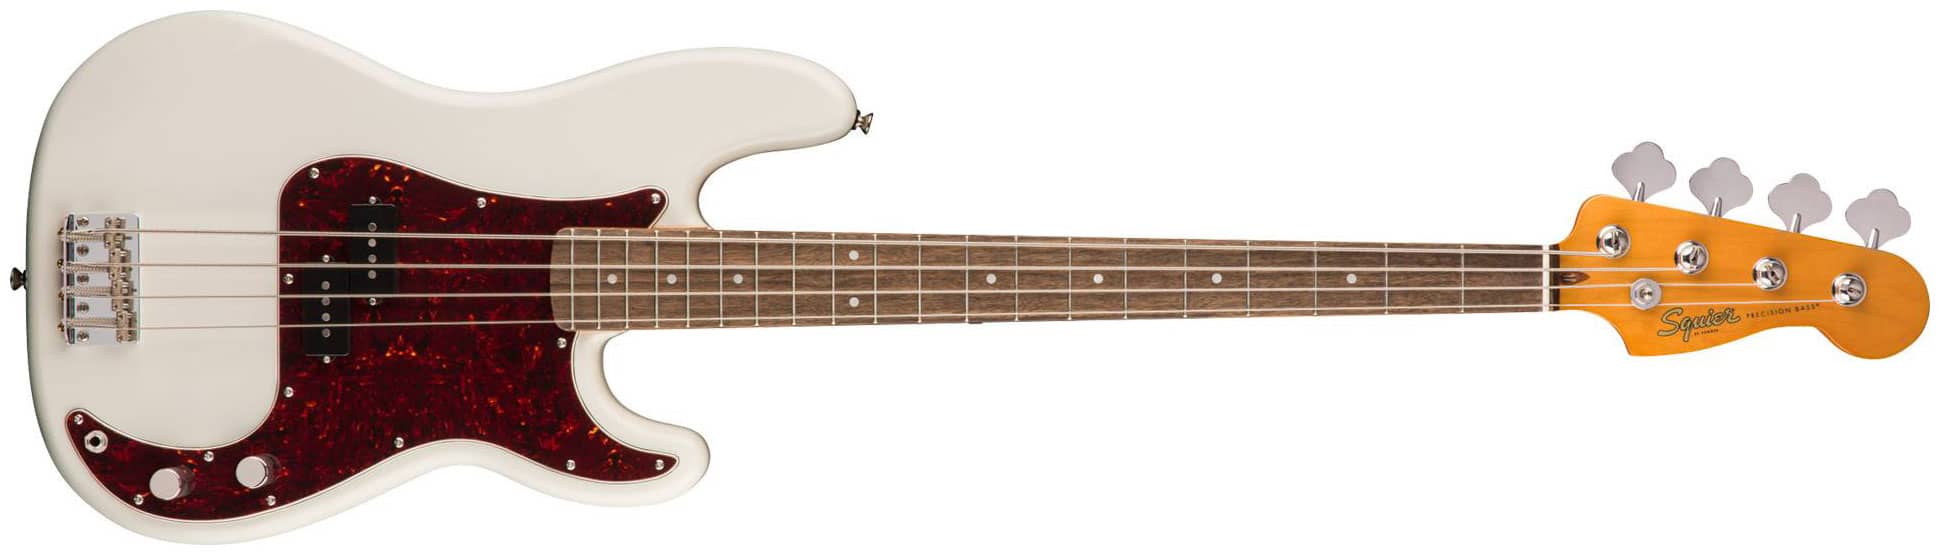 CONTRABAIXO FENDER SQUIER CLASSIC VIBE 60S P. BASS LR - 037-4510-505 - OLYMPIC WHITE